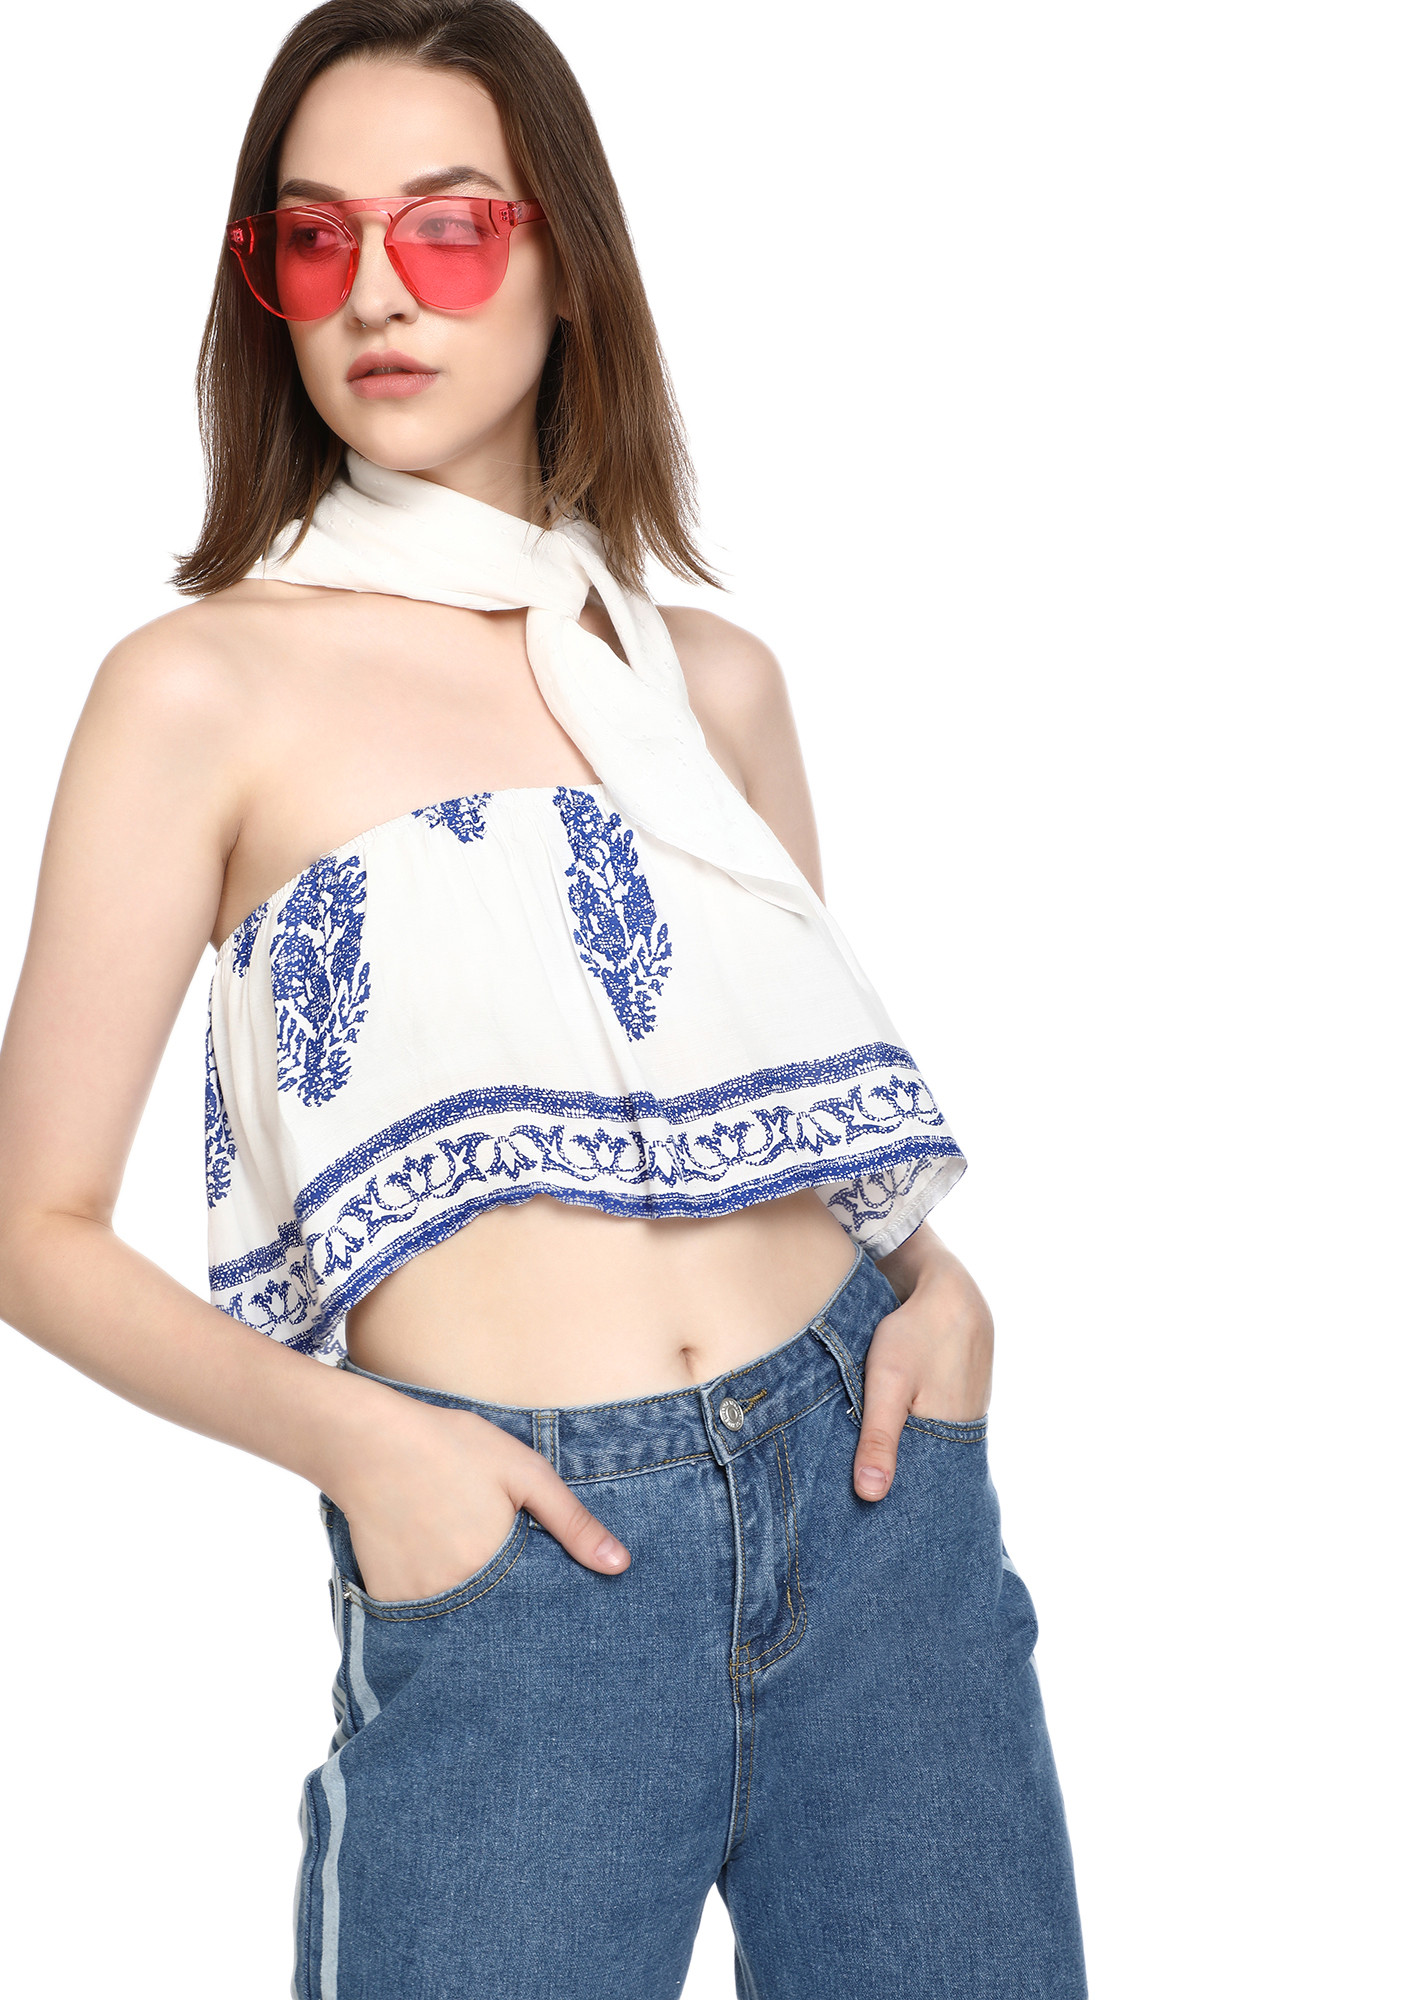 CRUSH ON YOU BLUE BANDEAU CROP TOP 